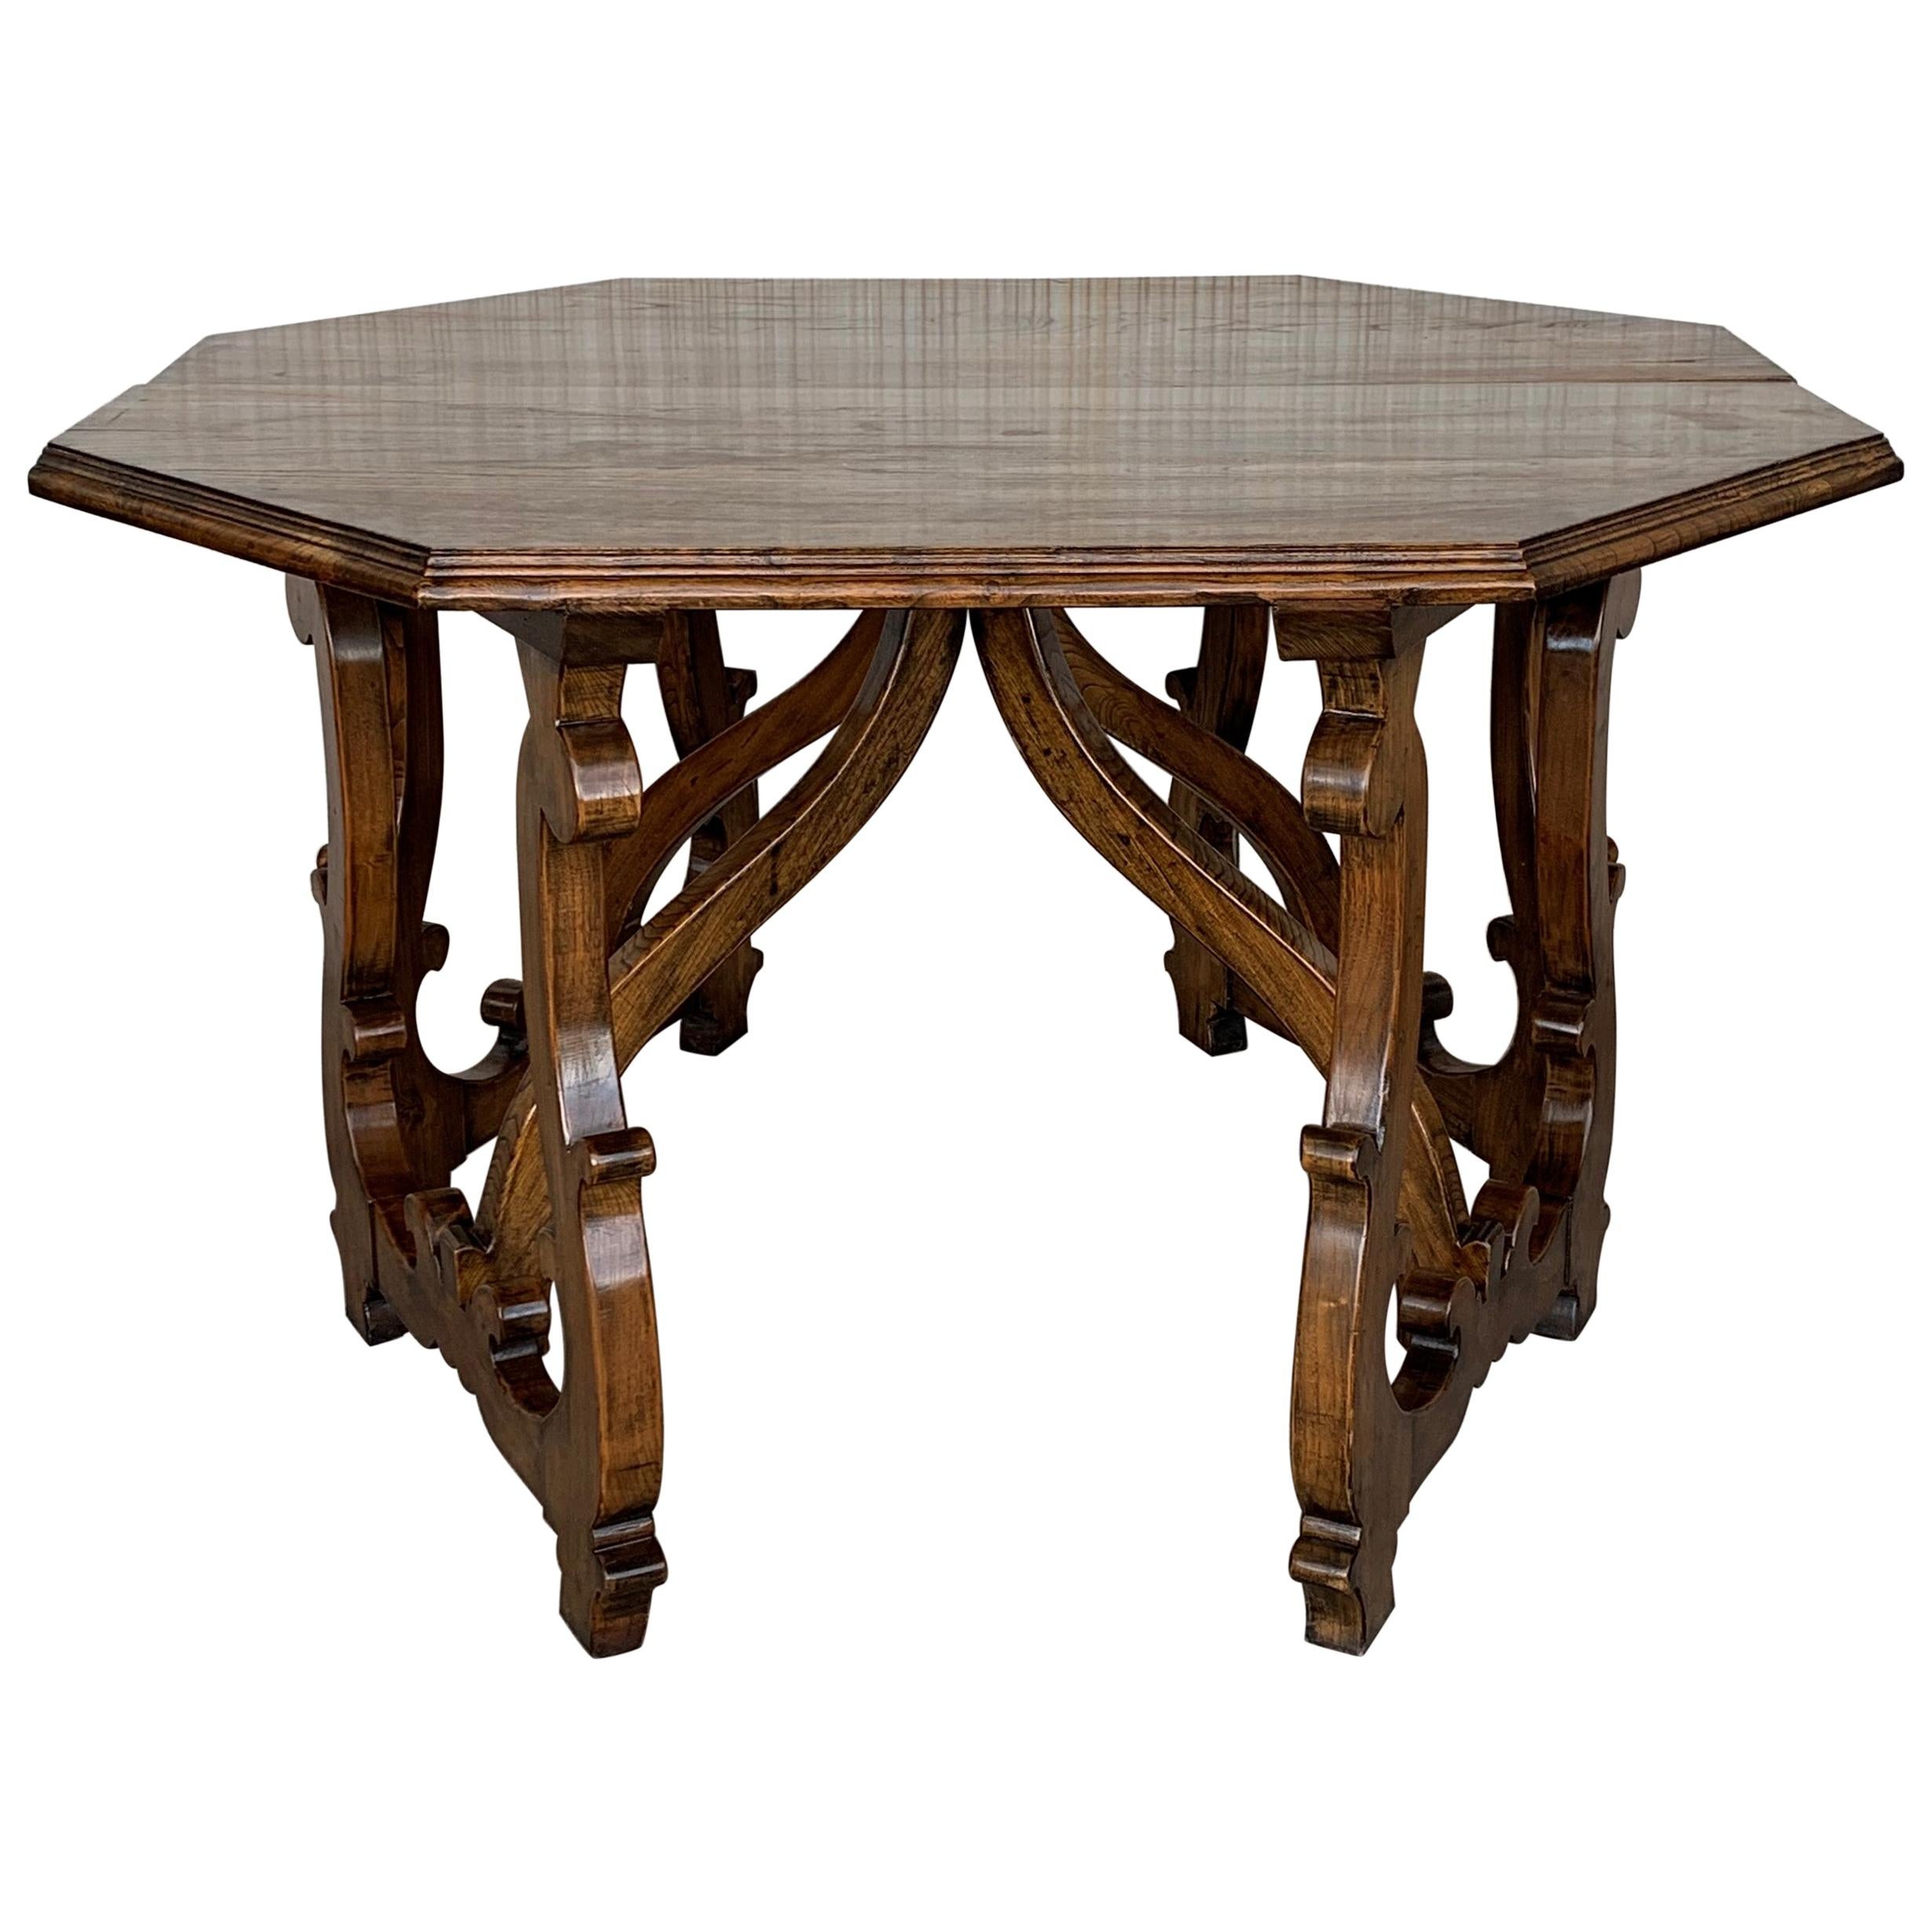 Early 20th Convertible Spanish Walnut Dining Room, Center Table with Lyre Legs